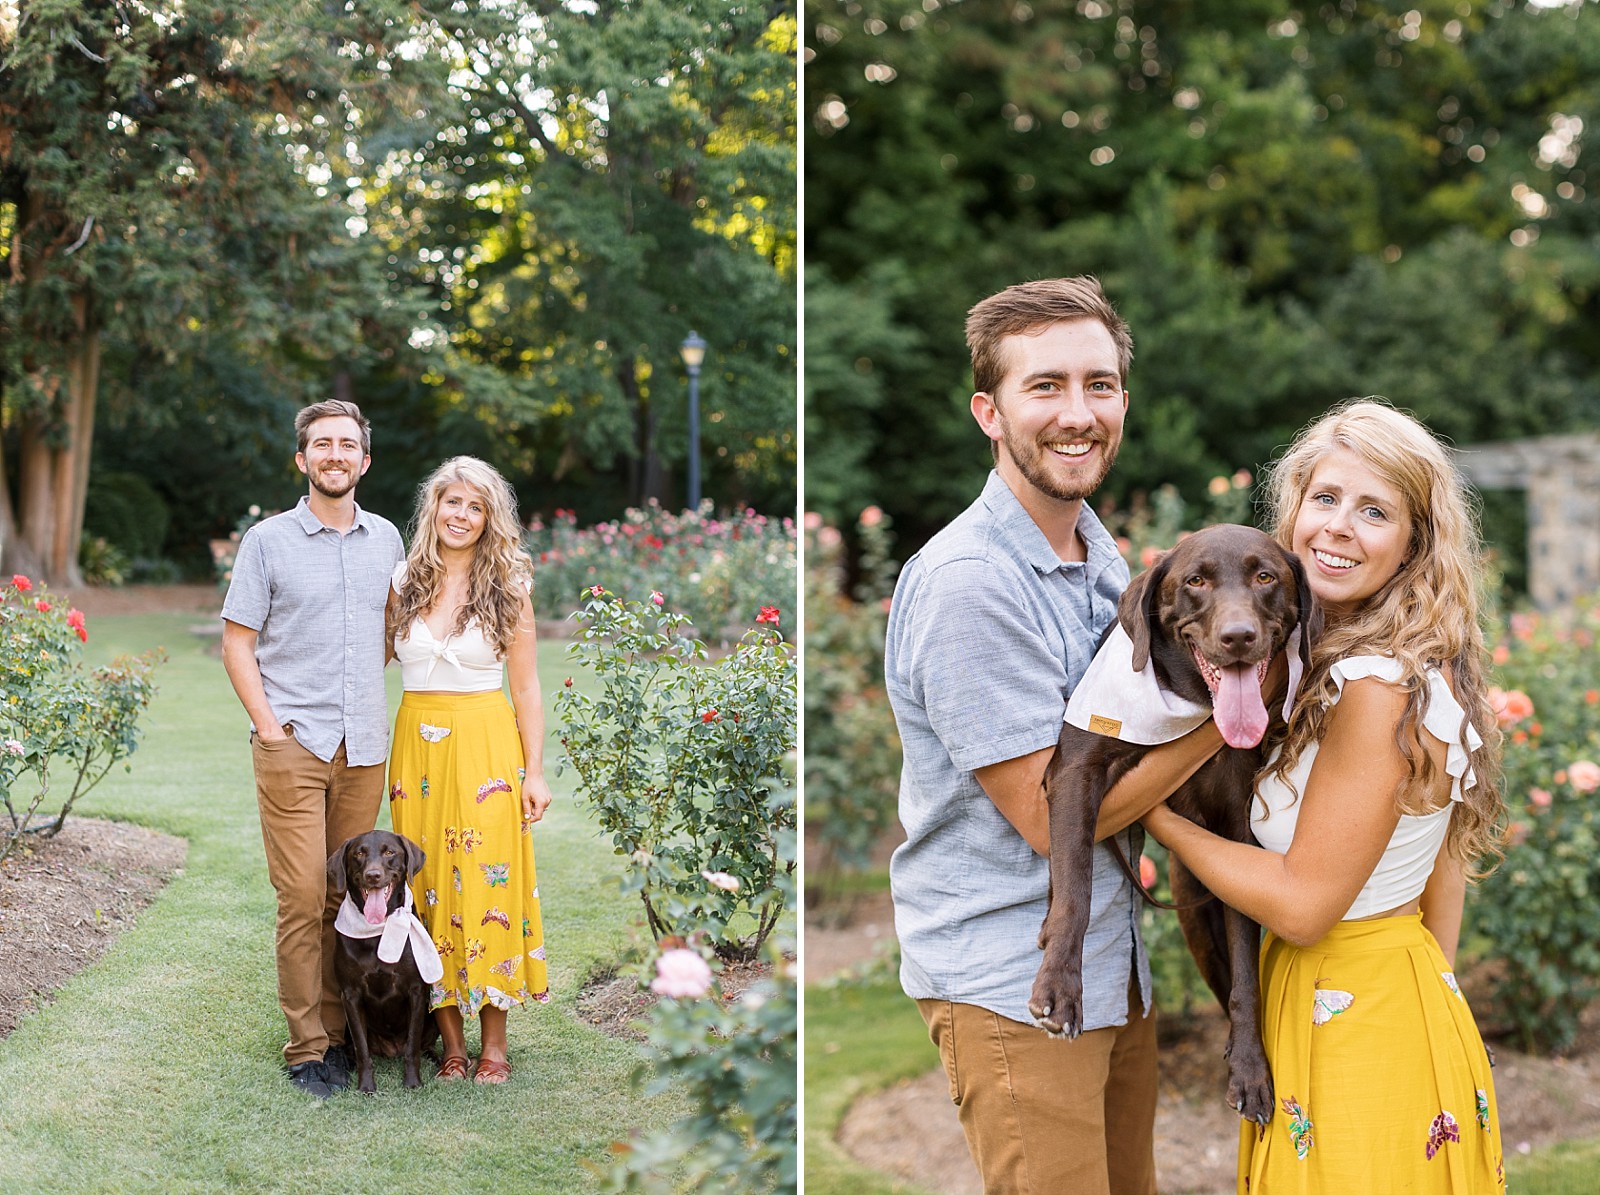 Family photo with dog wearing a bandana at Raleigh Rose Garden Anniversary Photos | Raleigh Portrait Photographer | Raleigh NC Wedding Photographer